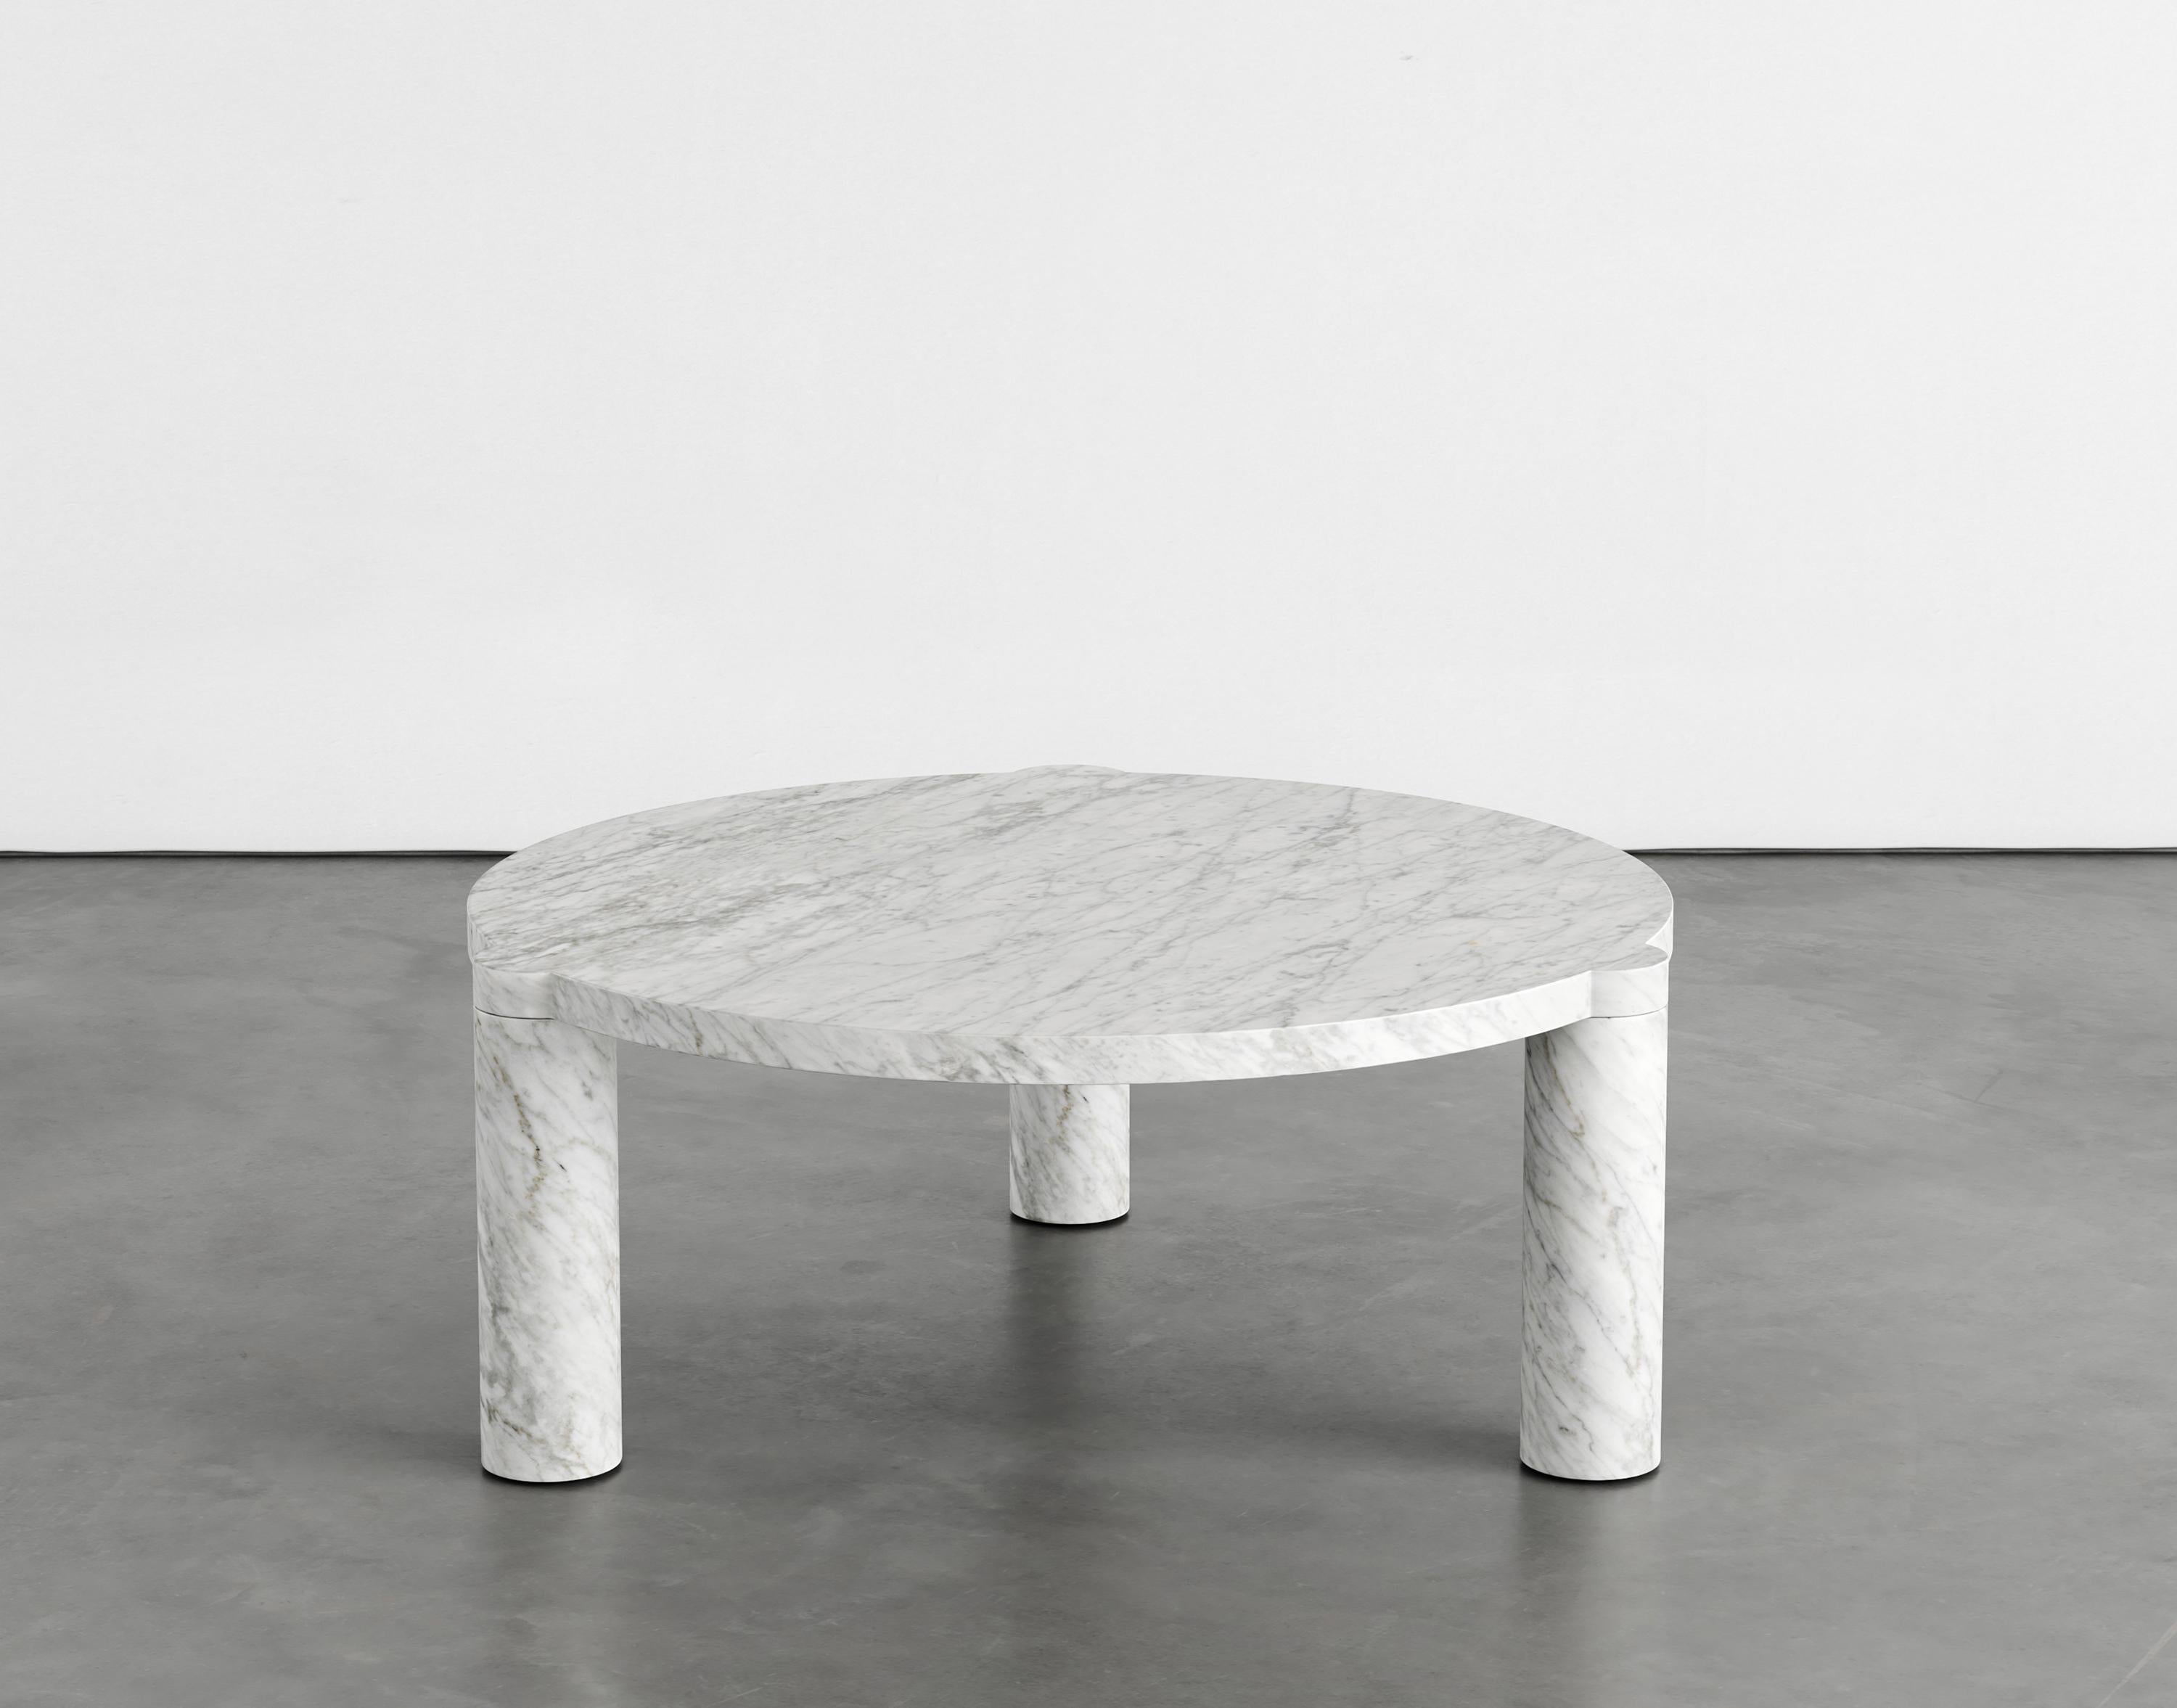 Alexis marble coffee table by Agglomerati
Dimensions: D 80 x H 33 cm.
Materials: Carrara Gioia marble.
Available in other stones.

Alexis Coffee Table has off-set, cylindrical legs that curve flush underneath the tabletop, providing a soft